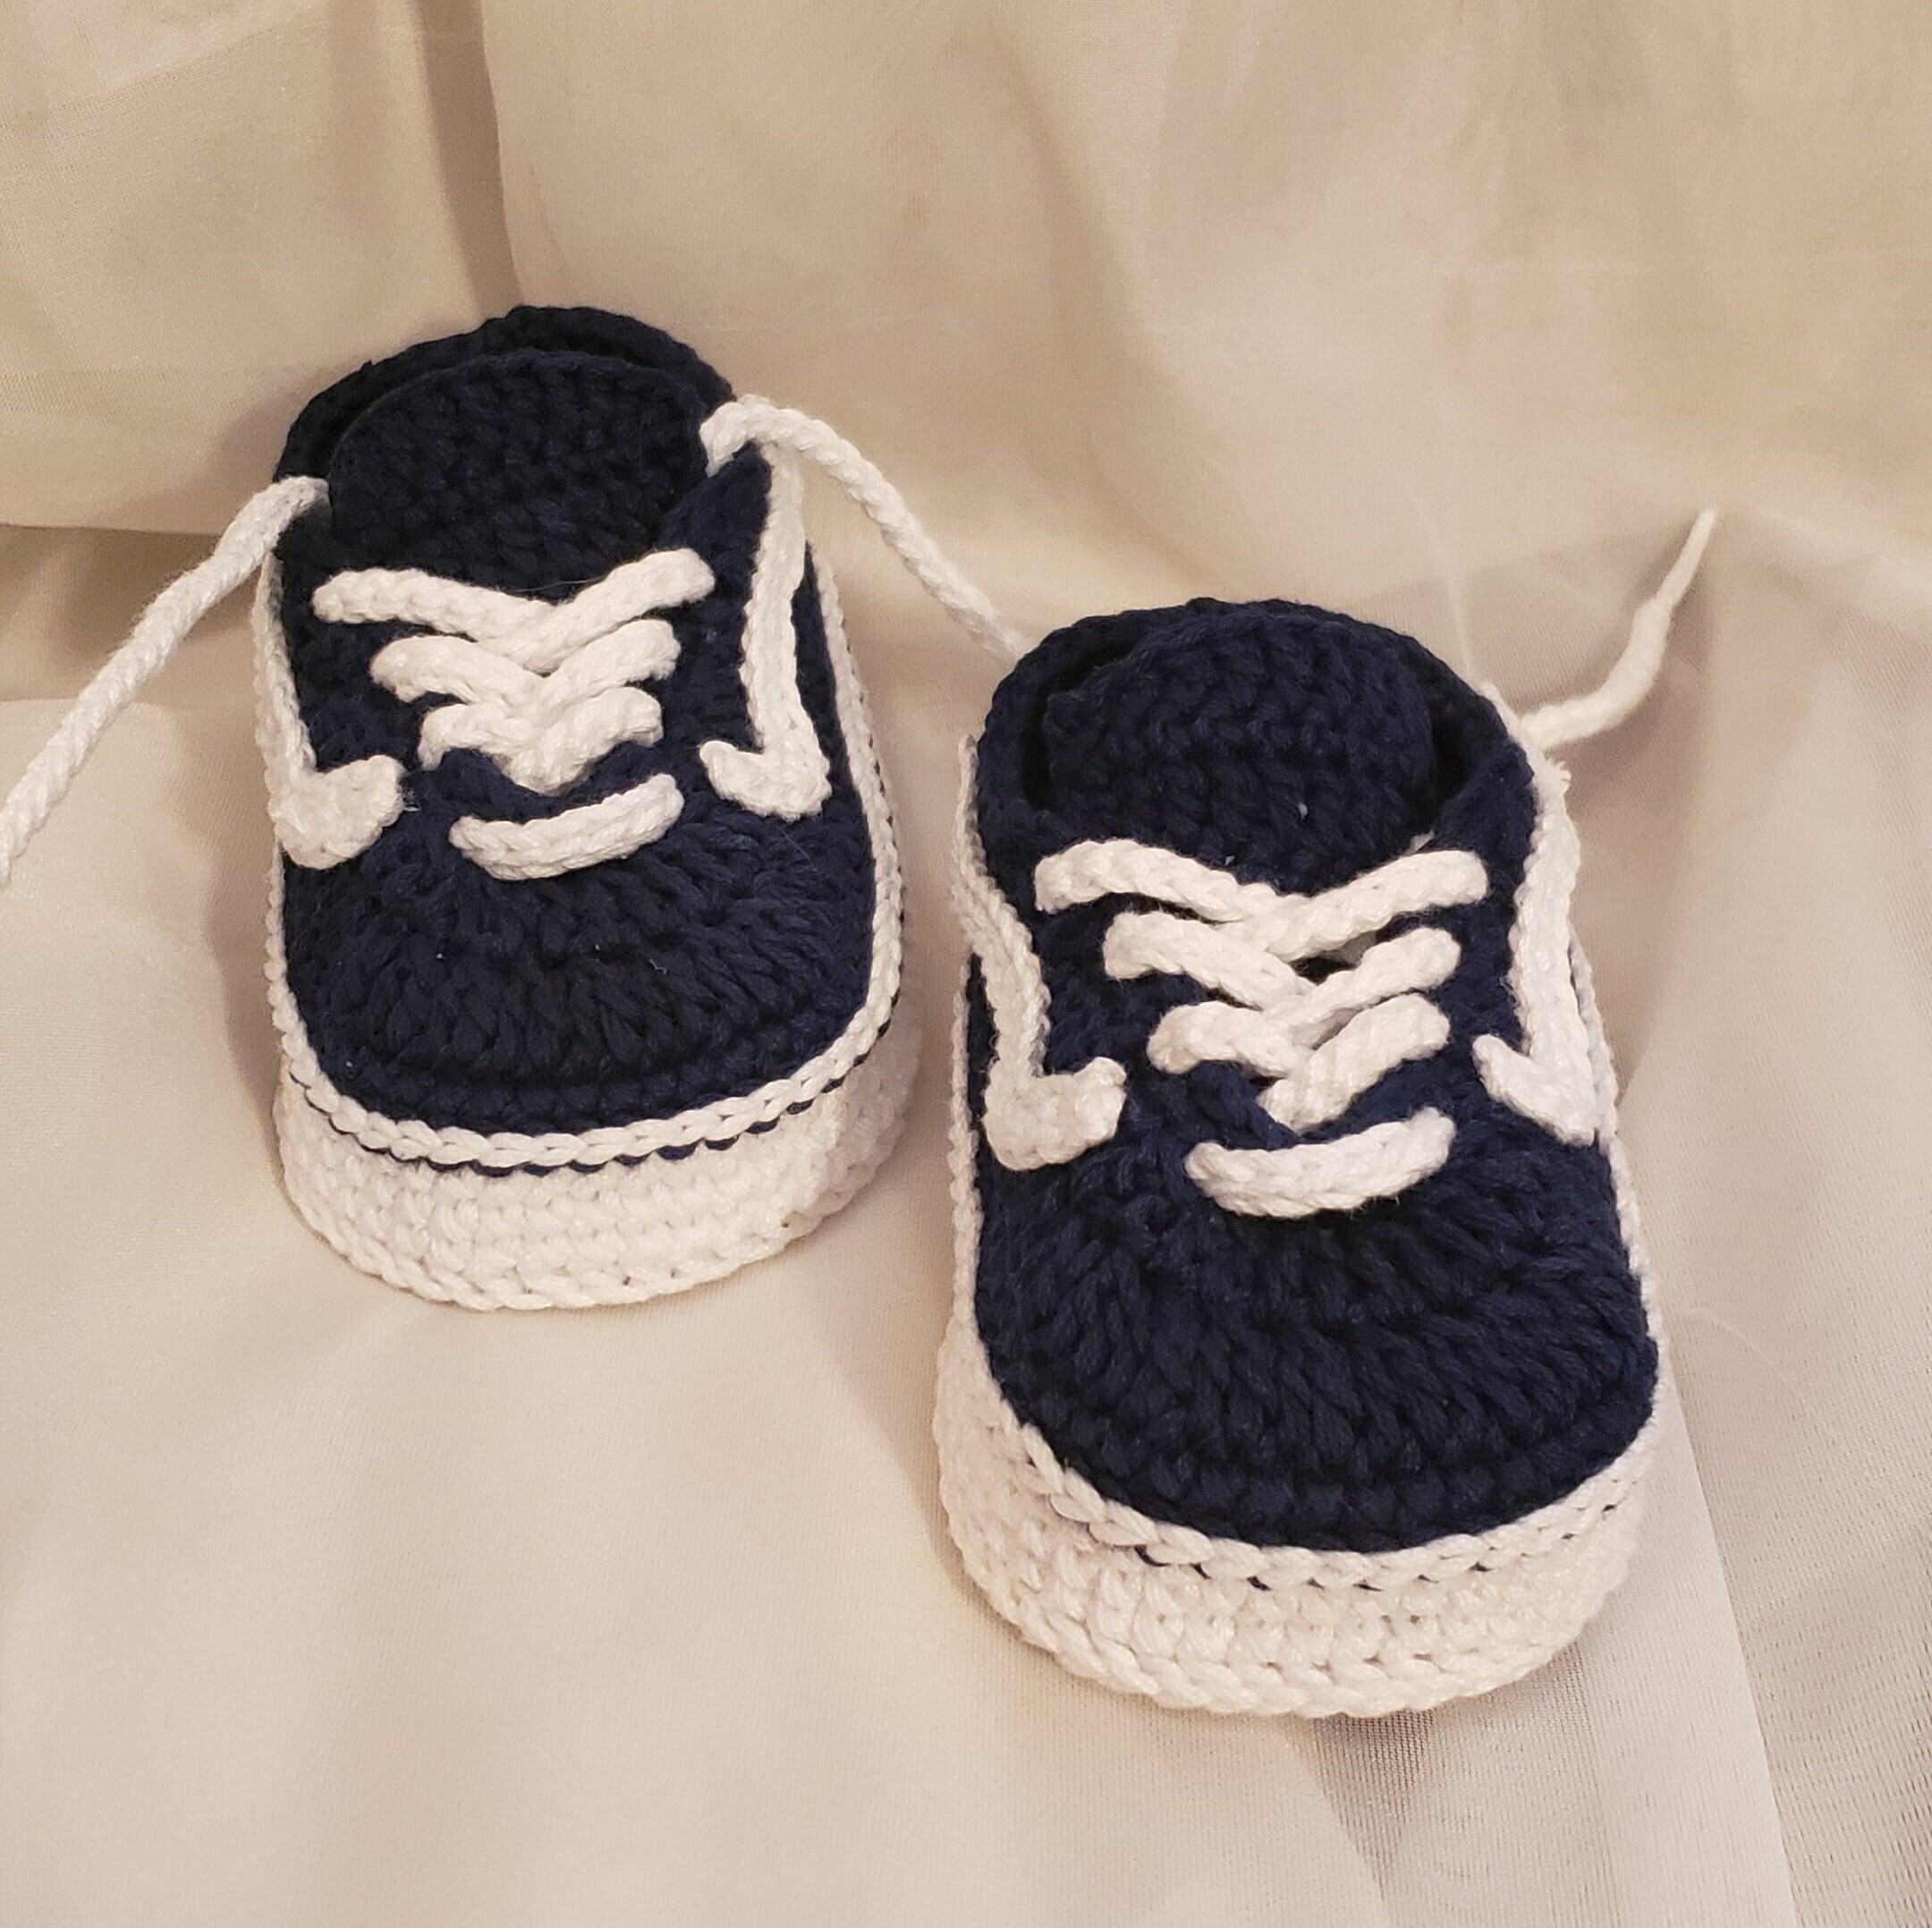 HANDMADE CROCHET BABY SHOES TRAINERS FIRST BOOTIES WOOL  BOOTS SLIPPERS UNISEX 